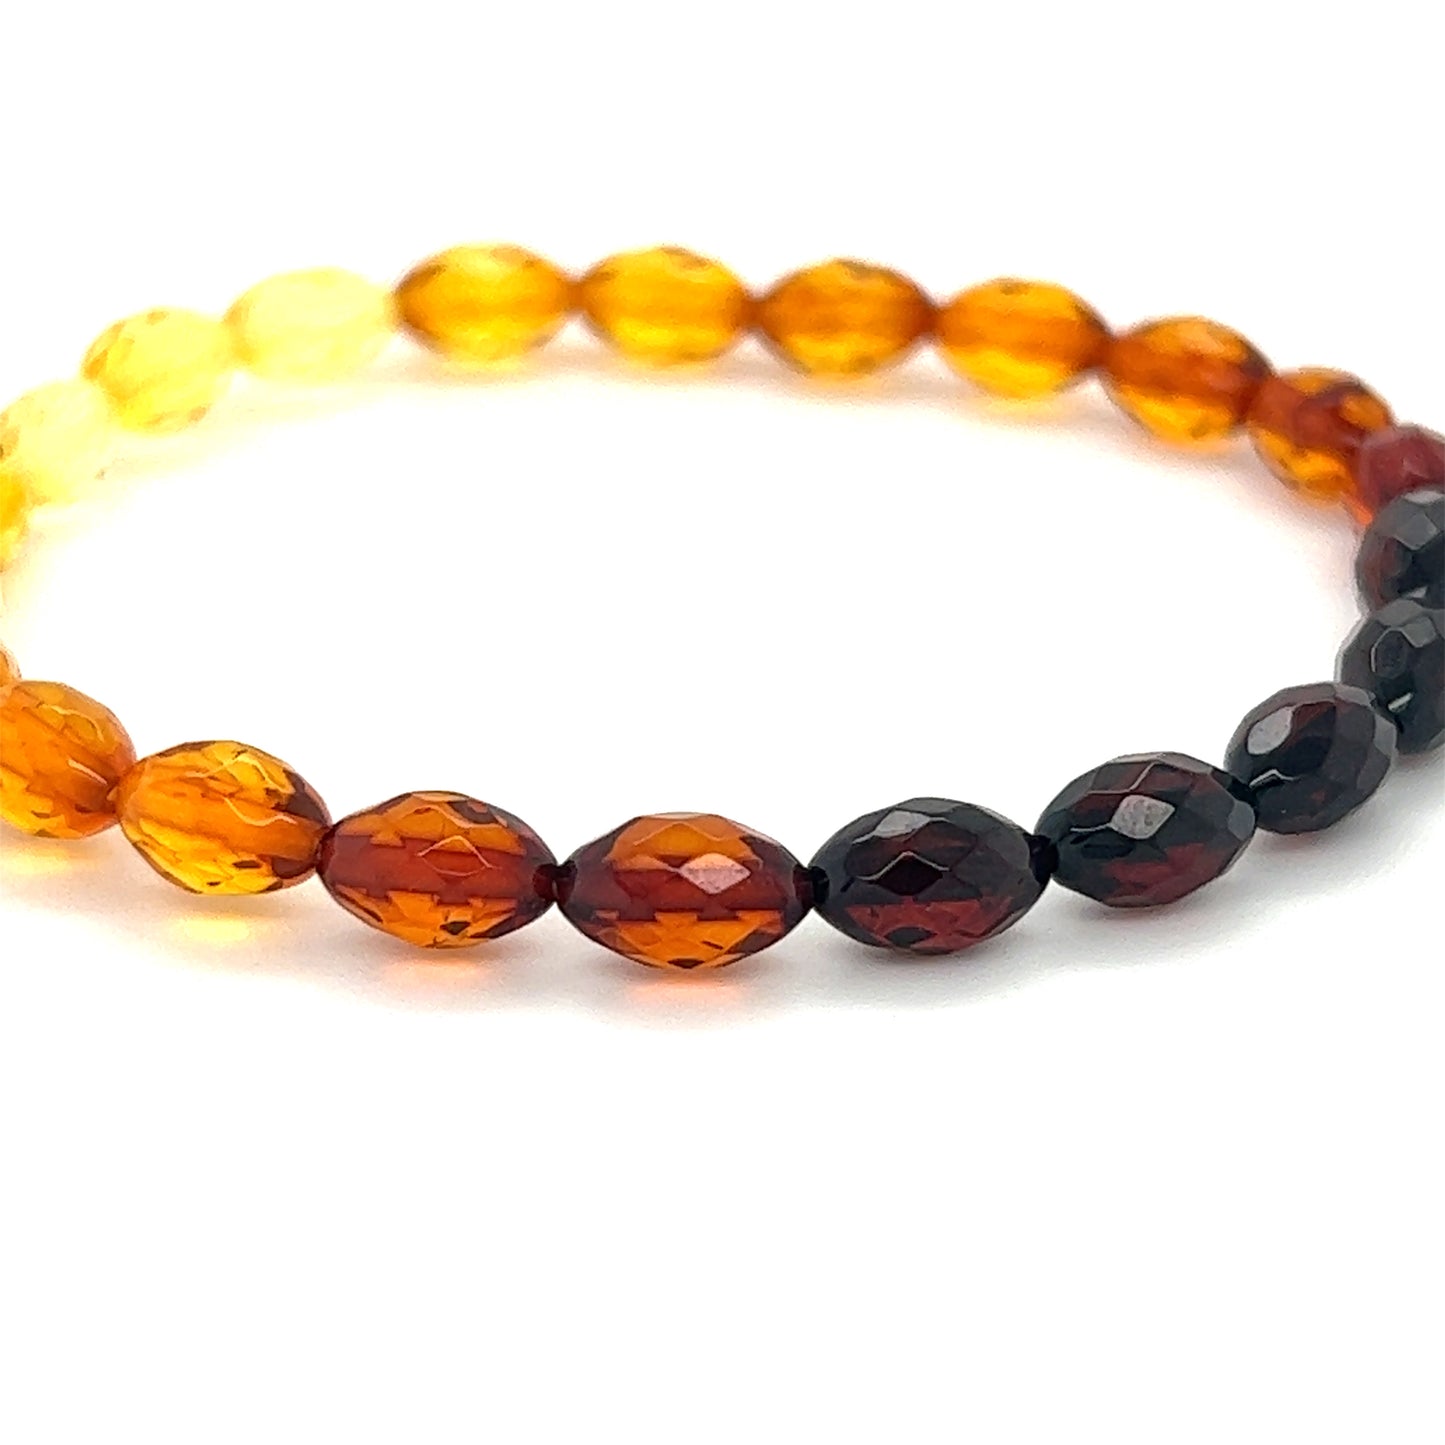 A Super Silver Faceted Baltic Amber Stretch Bracelet with orange, yellow and black amber beads.